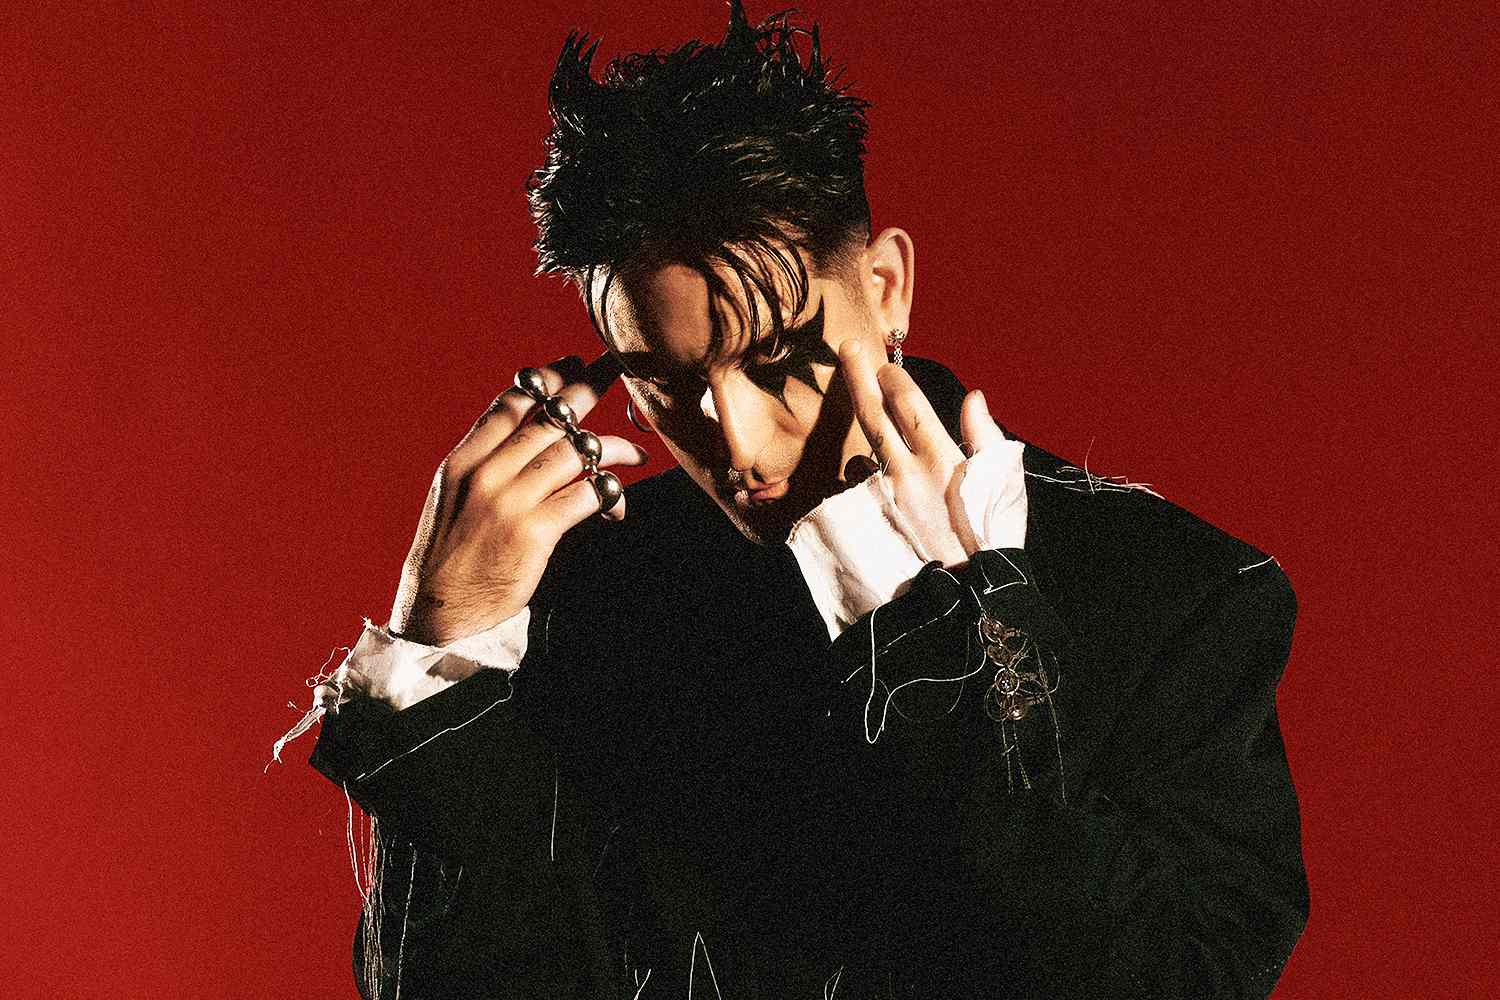 G-Eazy Addresses His Mother’s Death, Anxiety on Freak Show Album [Video]